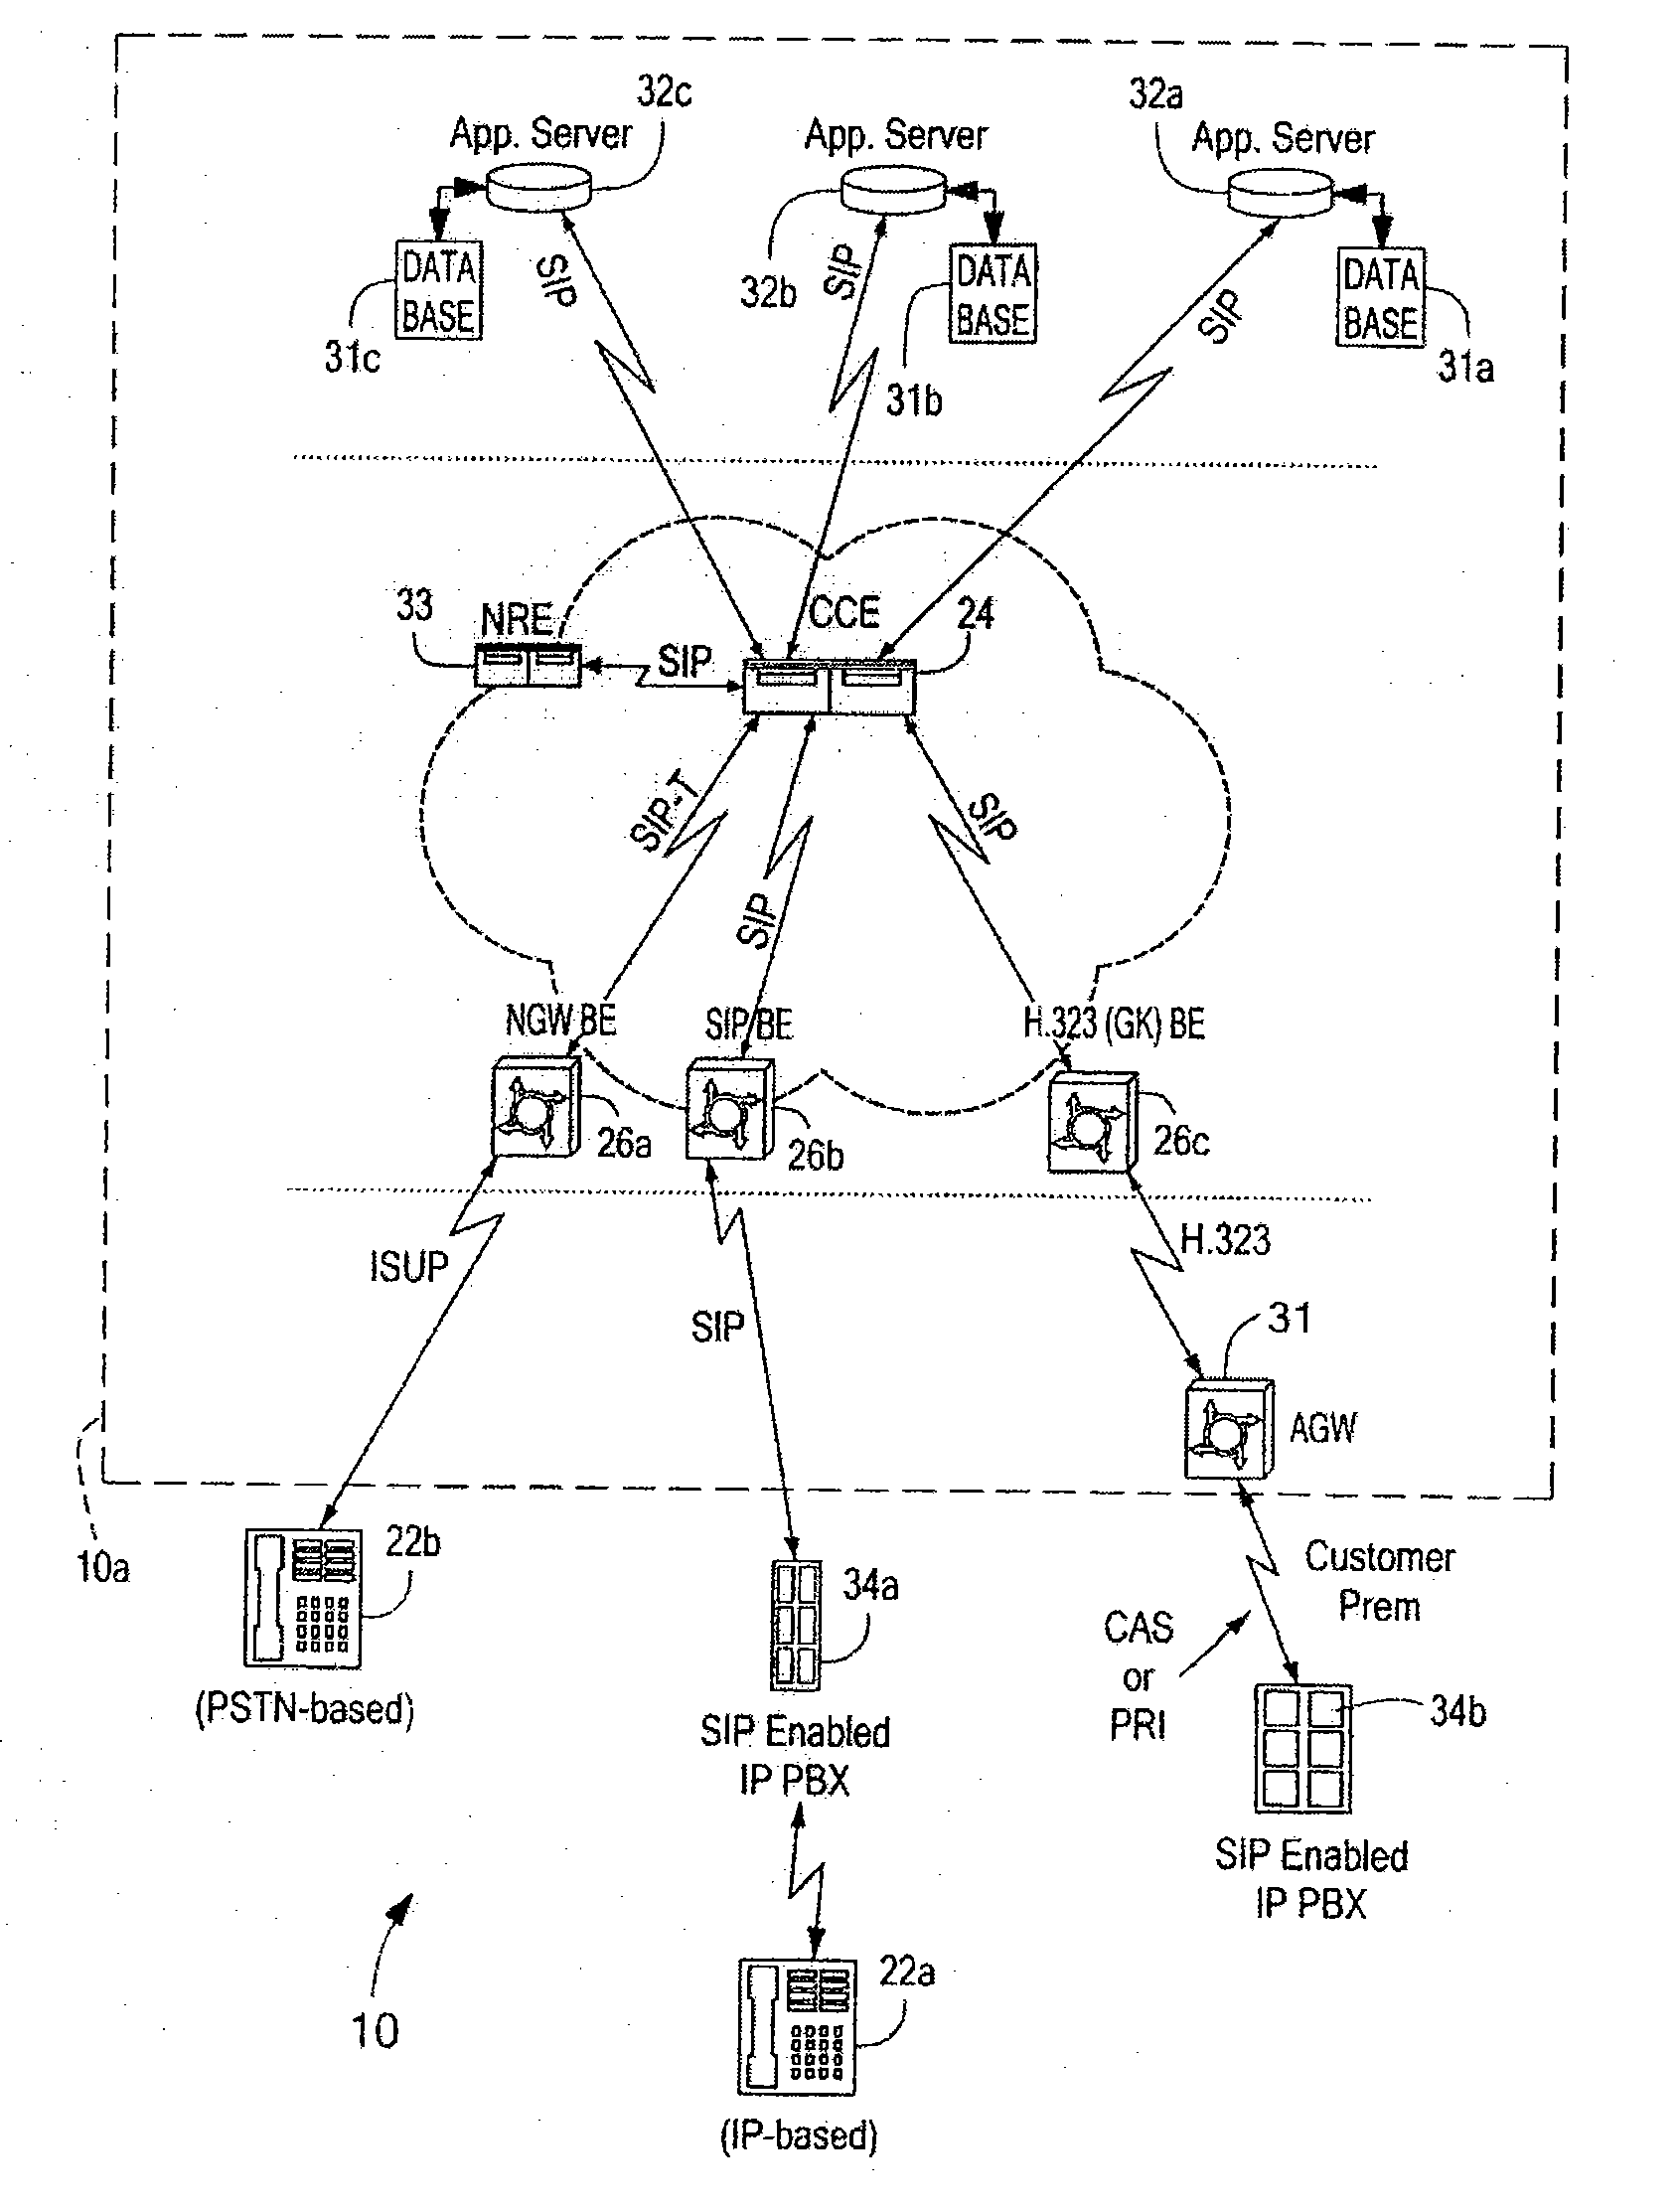 Call control element constructing a session initiation protocol (SIP) message including provisions for incorporating address related information of public switched telephone network (PSTN) based devices